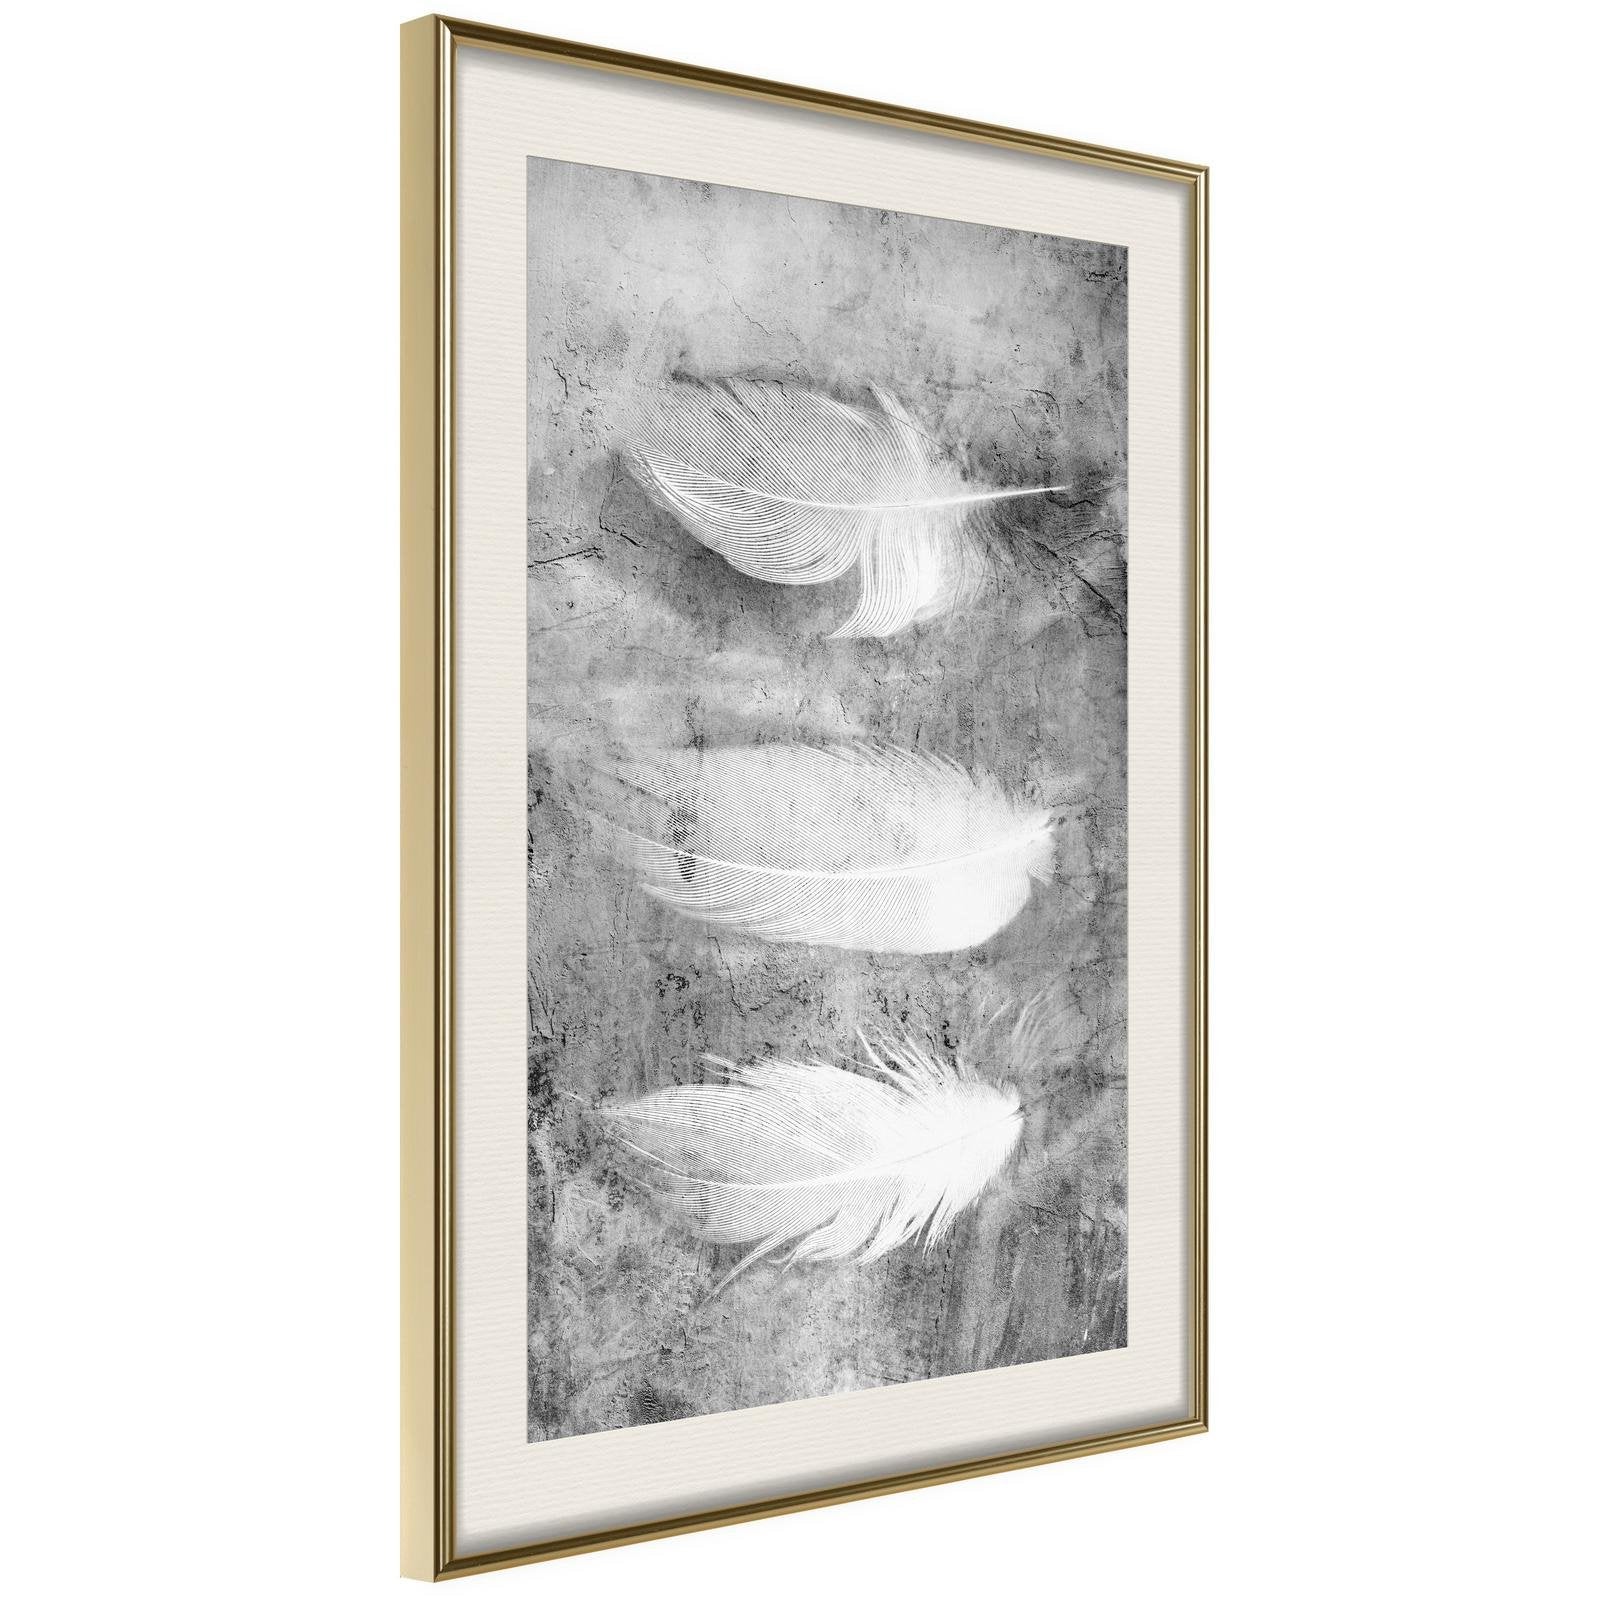 Inramad Poster / Tavla - Delicate Feathers - 40x60 Guldram med passepartout